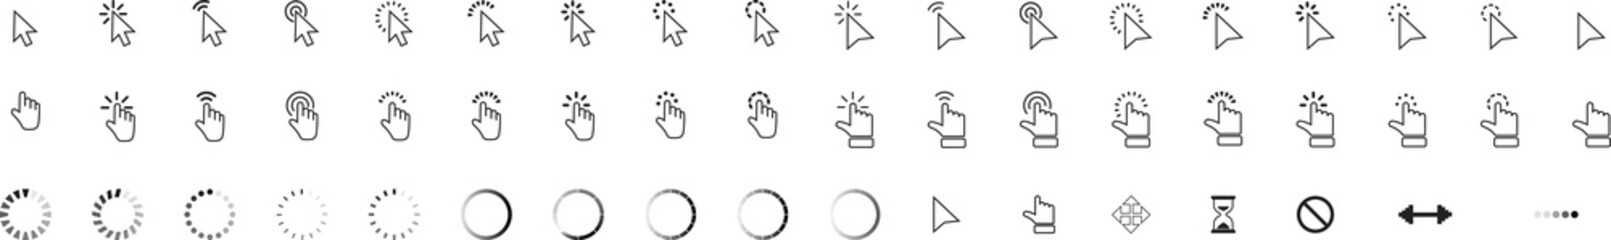 Computer mouse click cursor arrow icons set and loading icons. Cursor icon. Vector illustration. Mouse click cursor icons set. Loading icon.